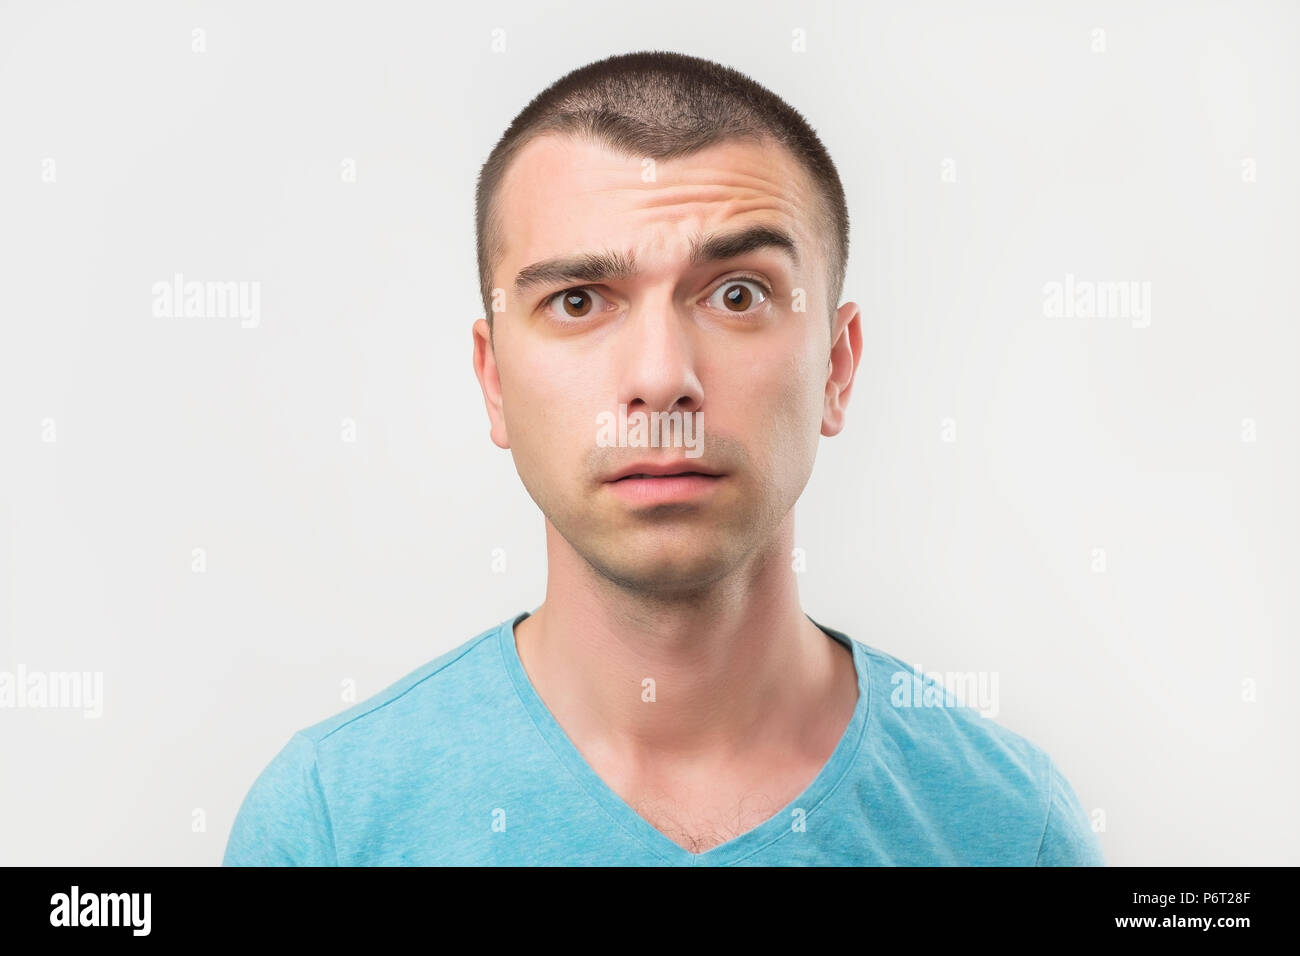 Doubtful italian man looking with disbelief expression . Stock Photo